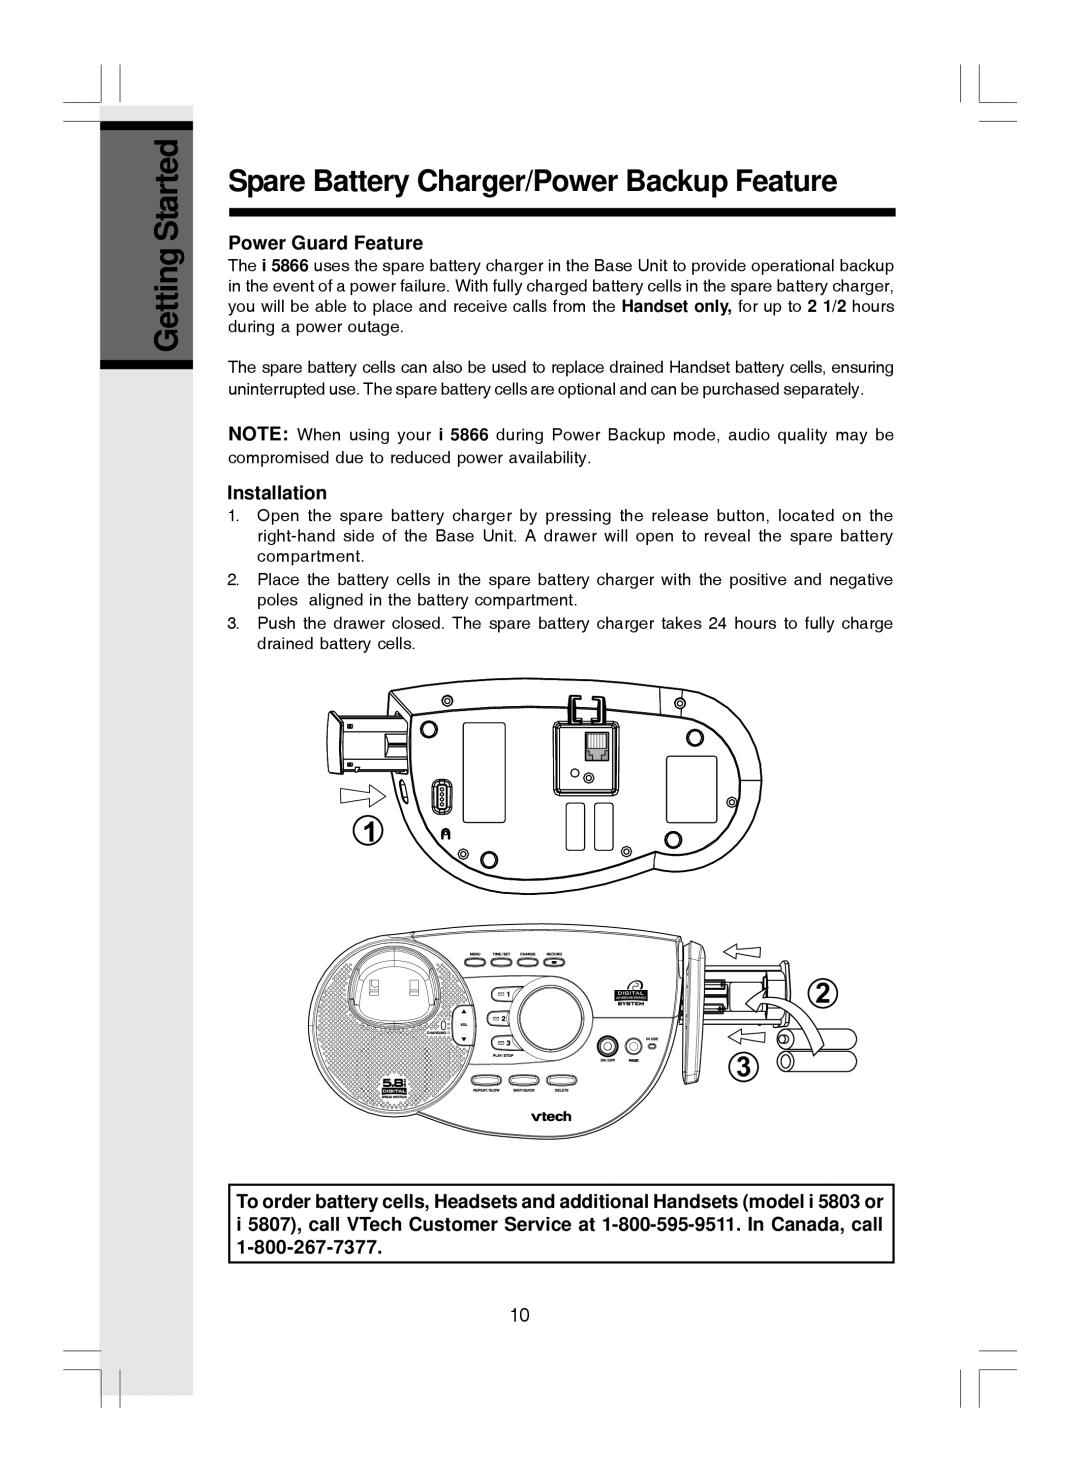 VTech i 5866 important safety instructions Power Guard Feature, Installation 